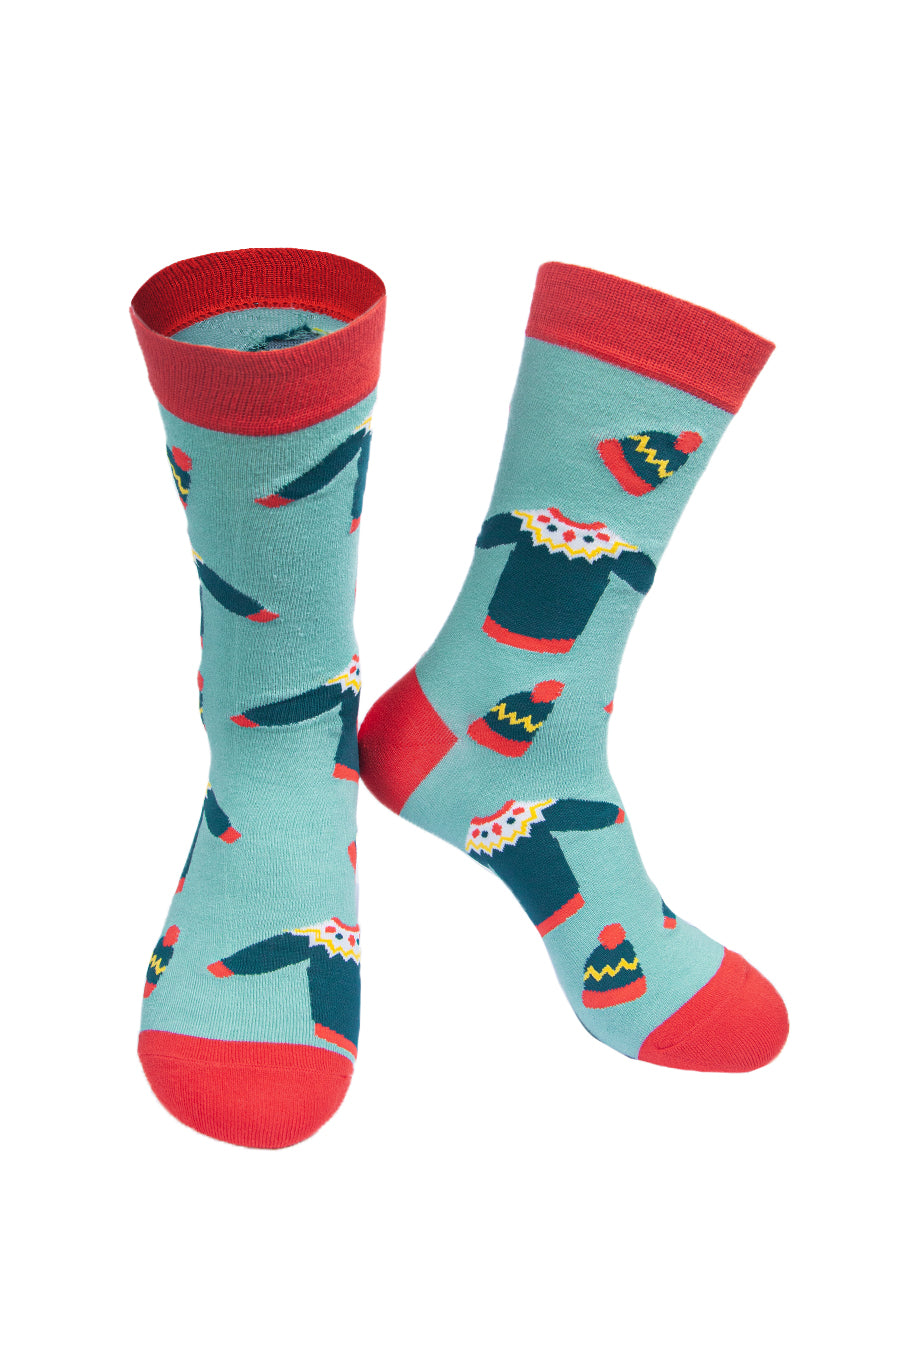 green socks with red heel, toe and cuff with a pattern of christmas jumpers and knitted hats